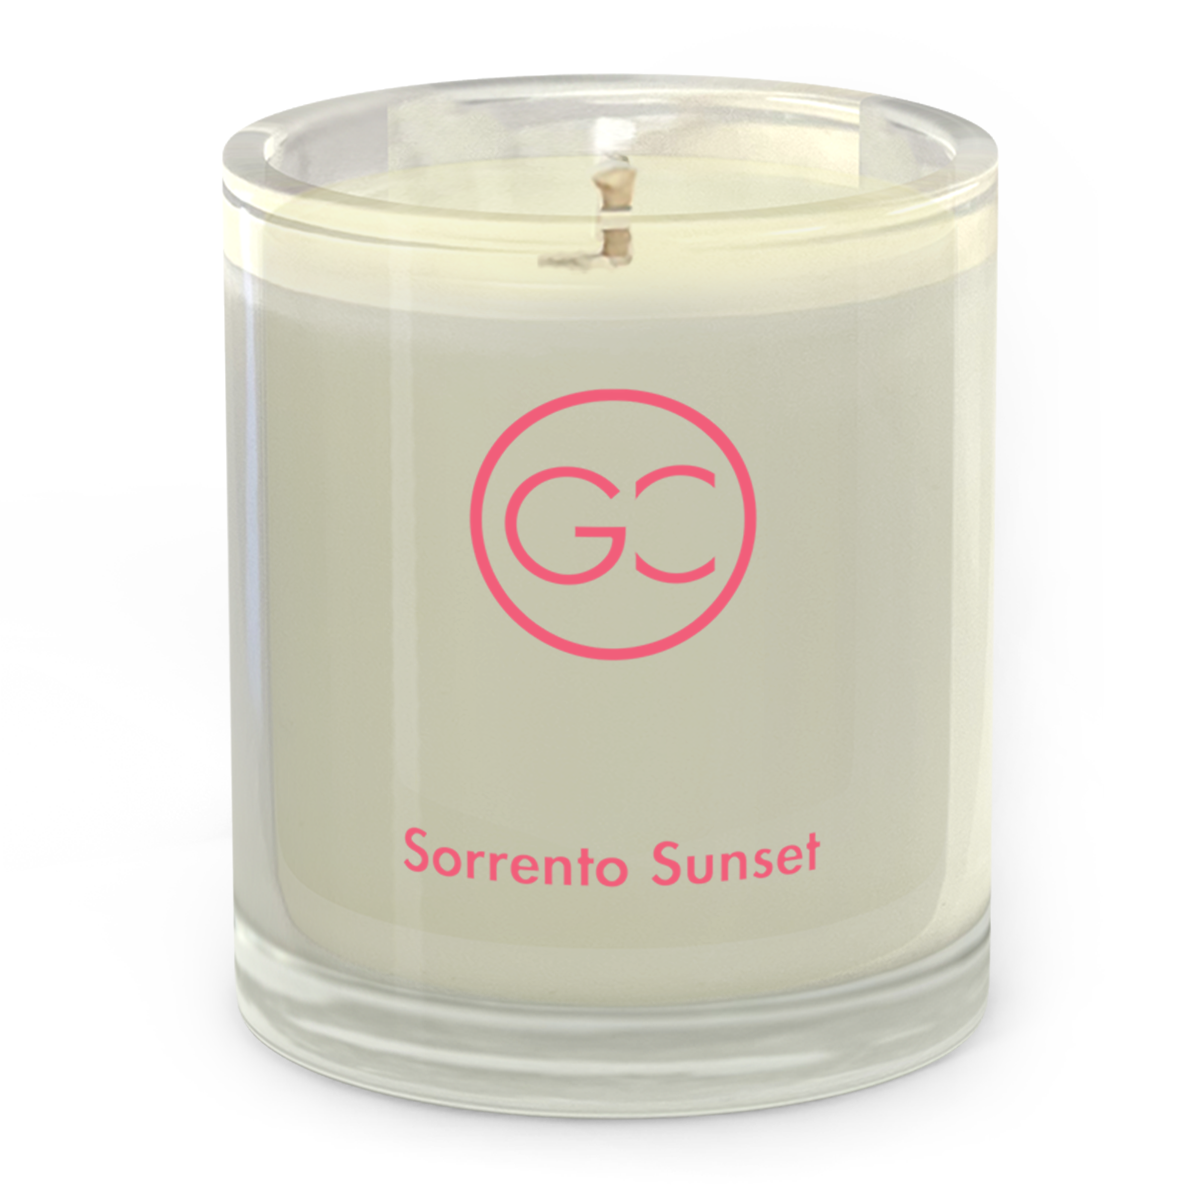 Sorrento Sunset - Limoncello Scented Soy Candle 55hr Burn